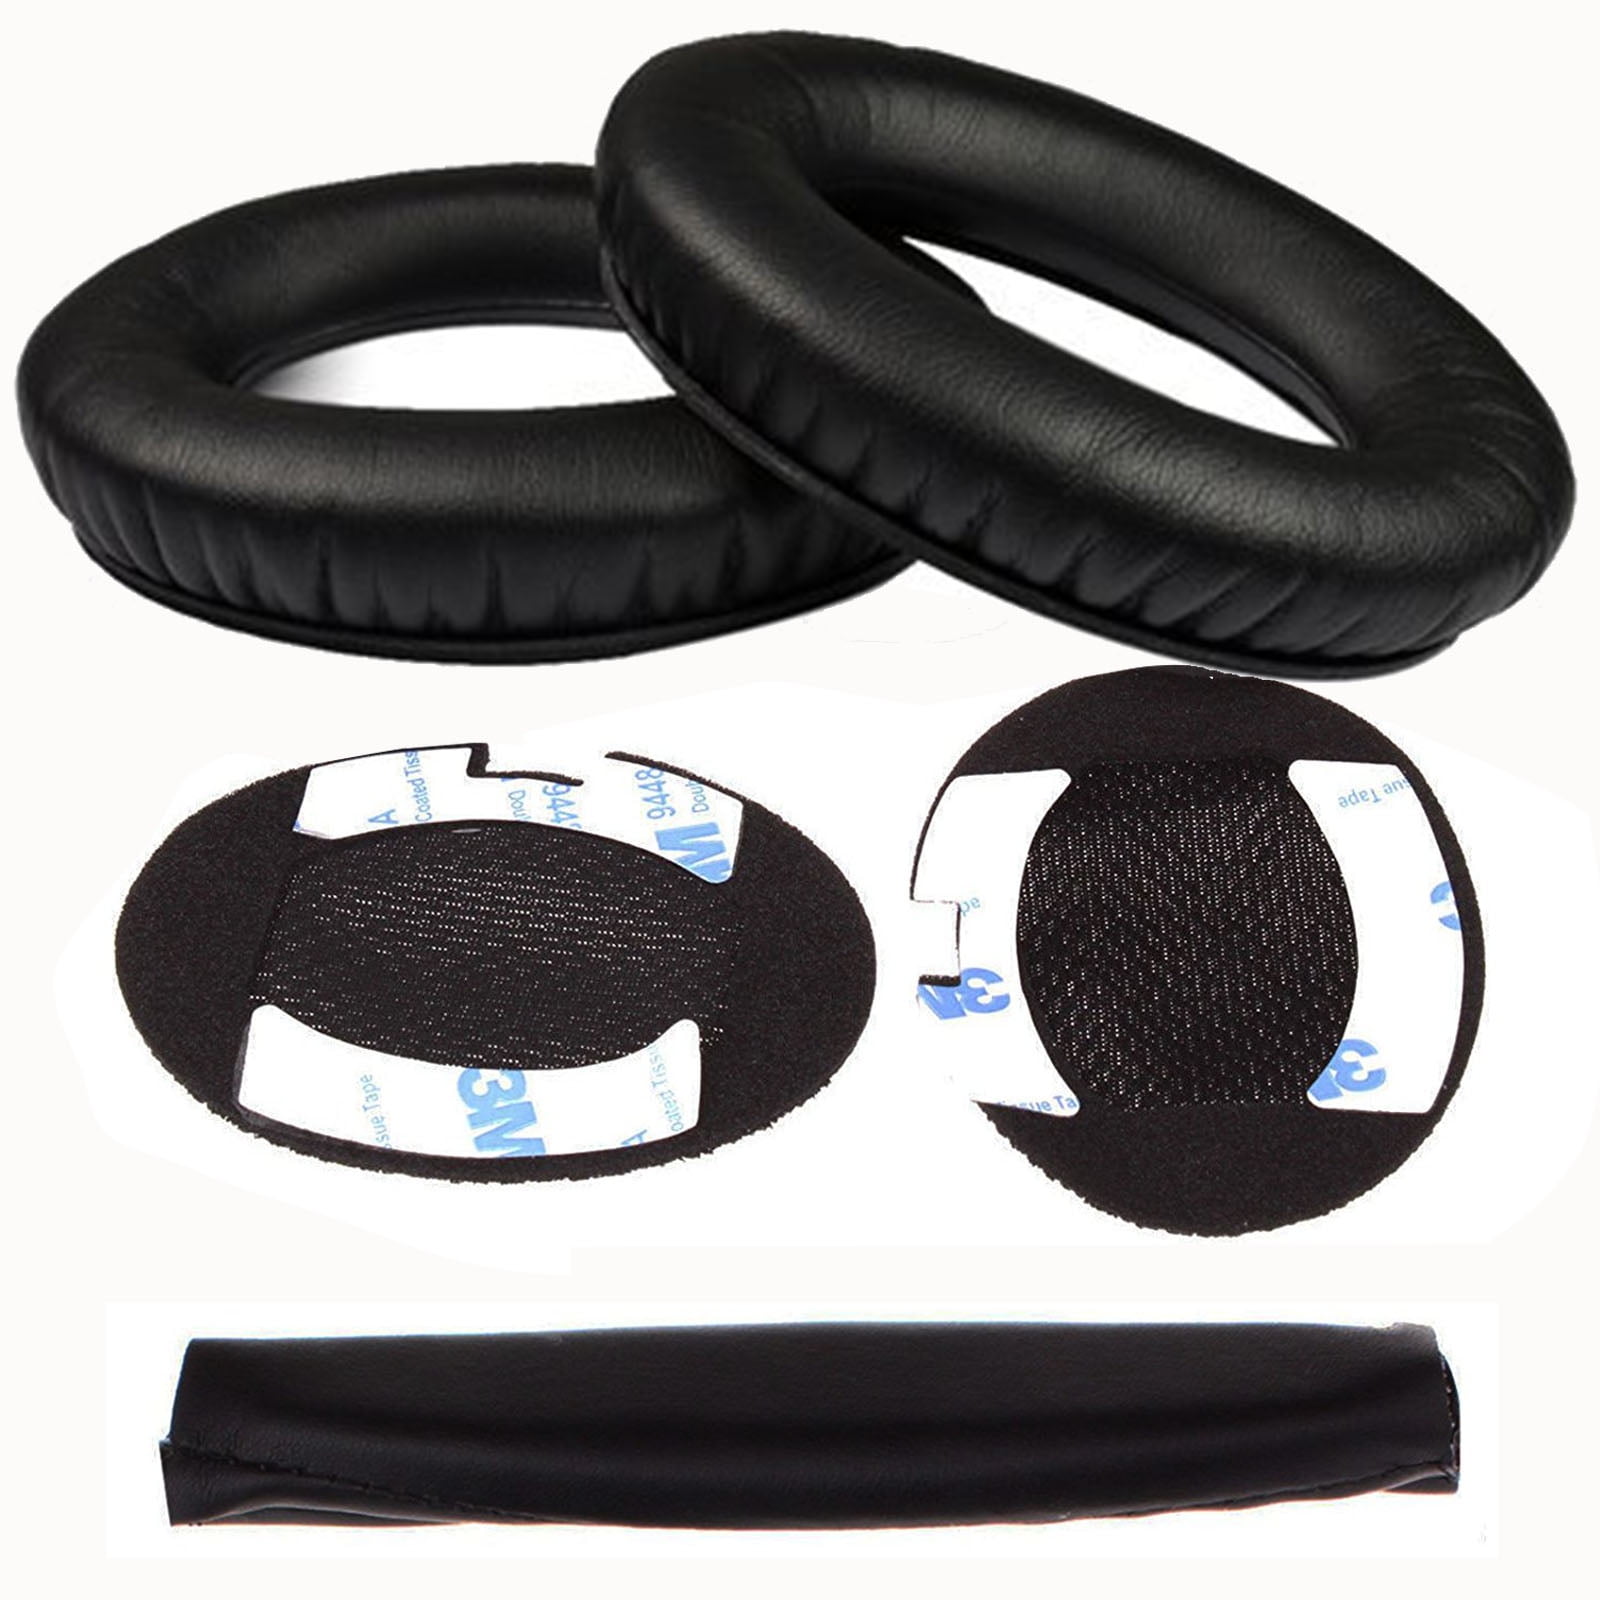 TSV Replacement Ear + Headband Cover Fit for Boses SoundTrue Around-Ear, AE2i, AE2w Headphones, Headband + Replacement Earpads, Headset Ear Cushion Repair Parts - Walmart.com